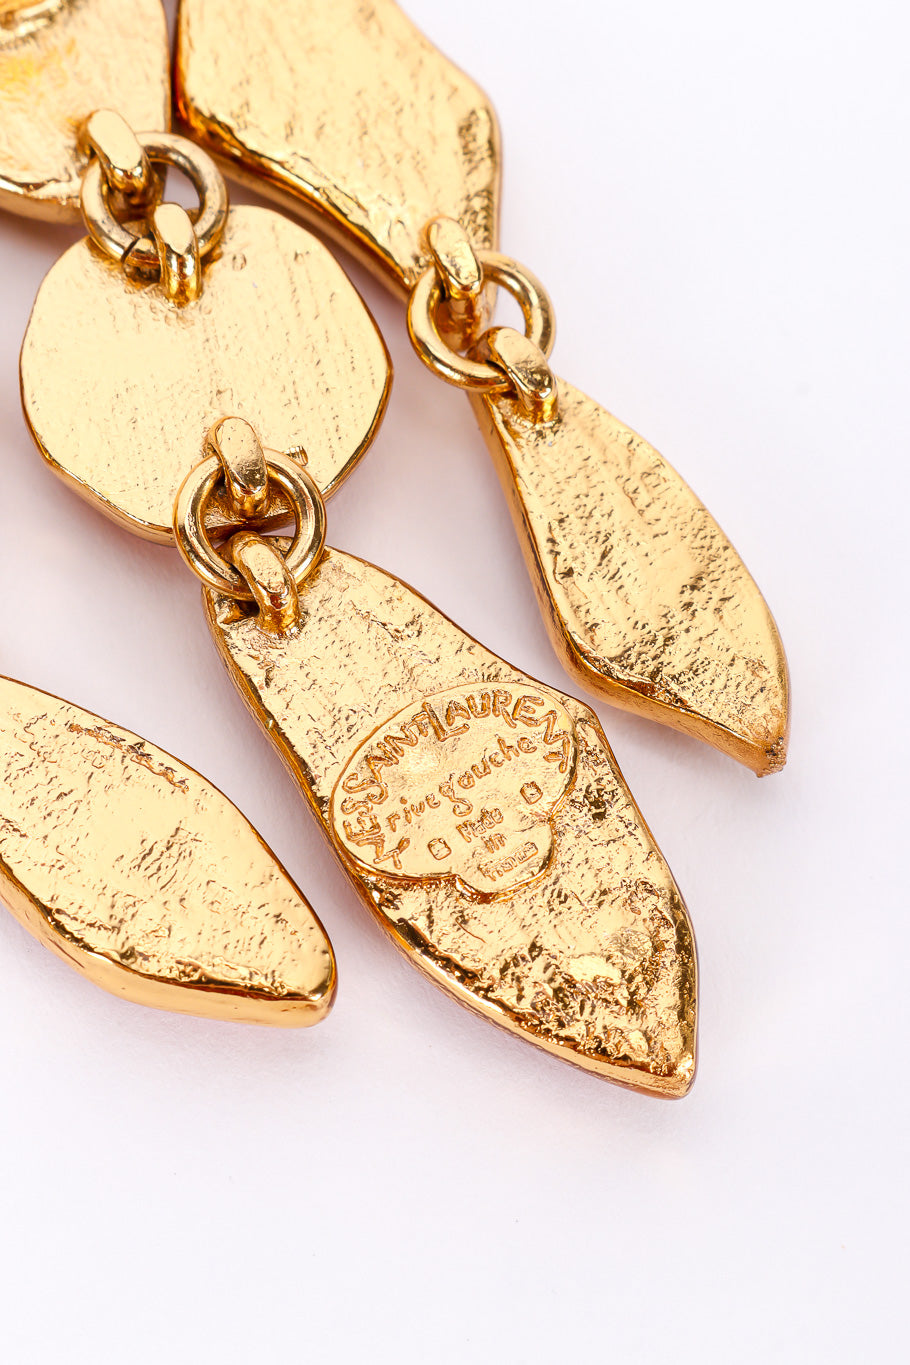 Chandelier earrings by Yves Saint Laurent on white background cartouche close @recessla